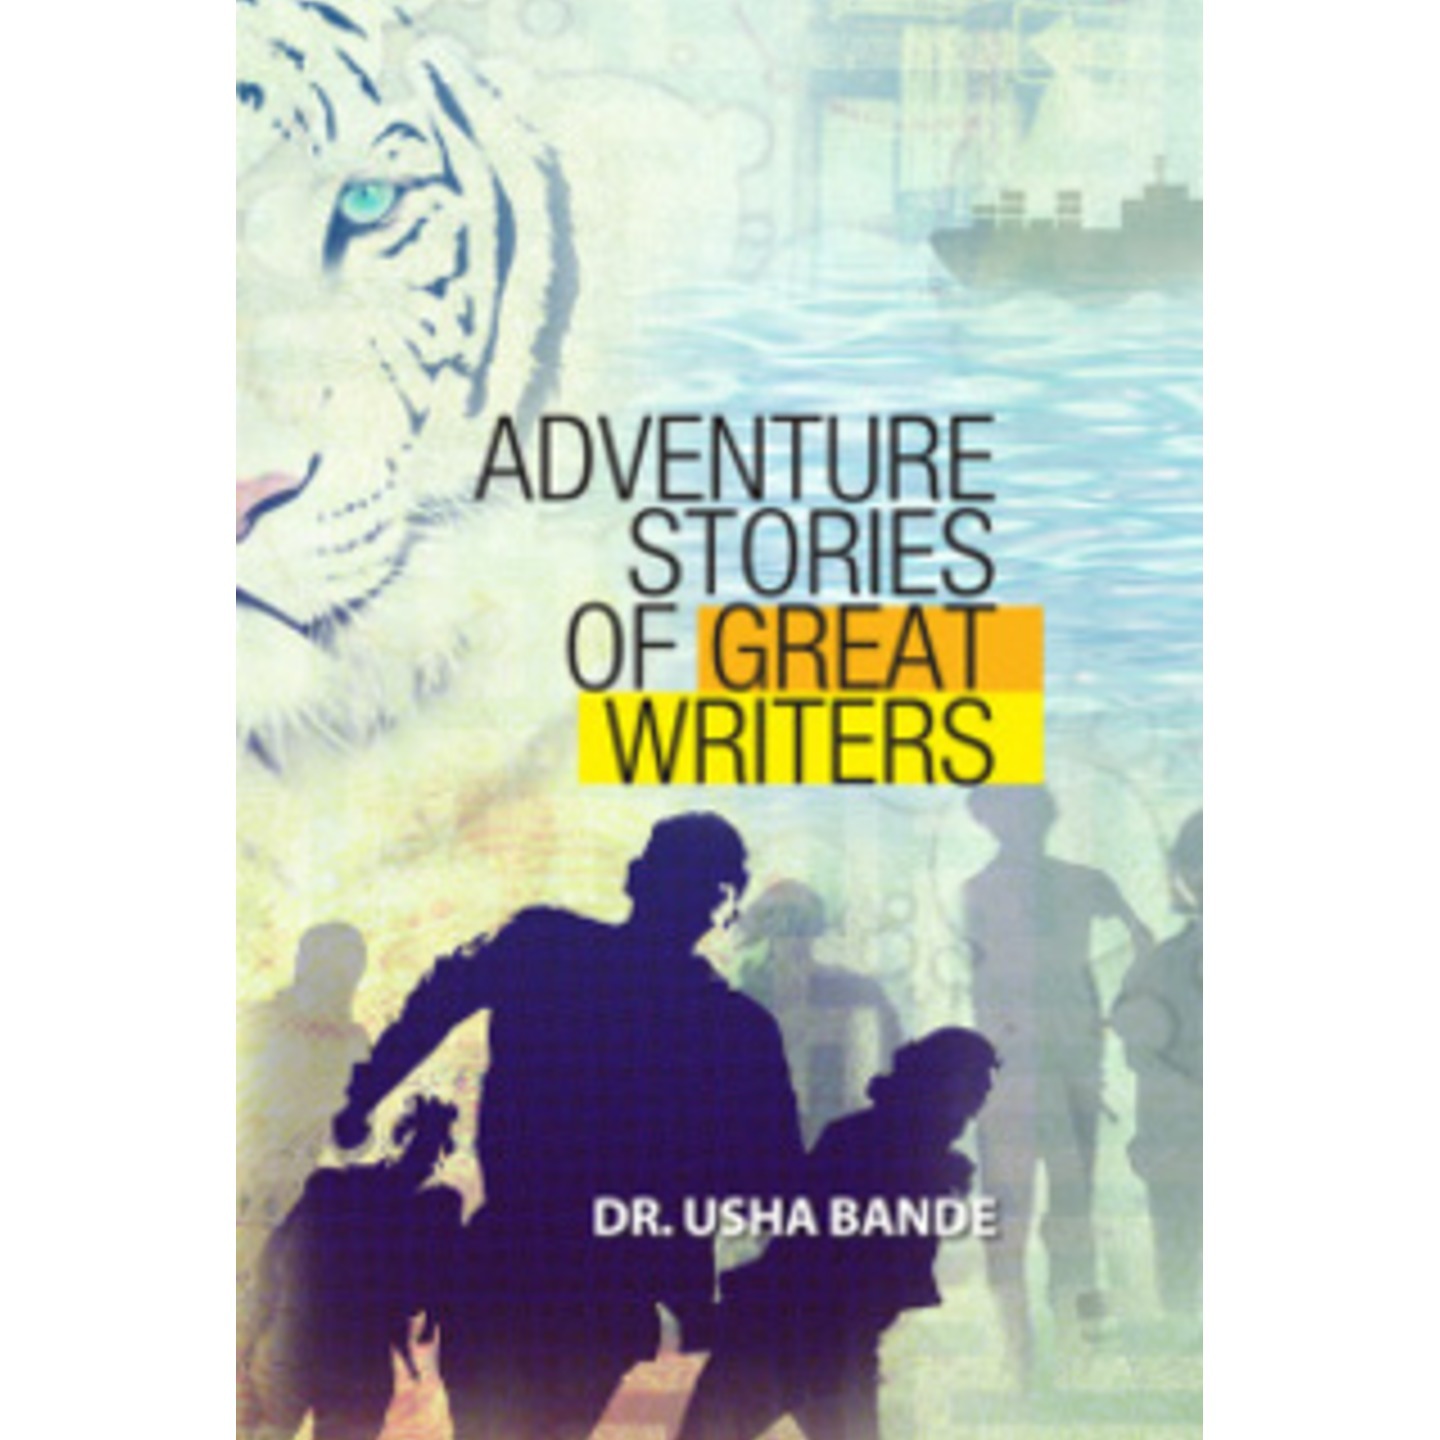 Adventure Stories of Great Writers by Dr. Usha Bande